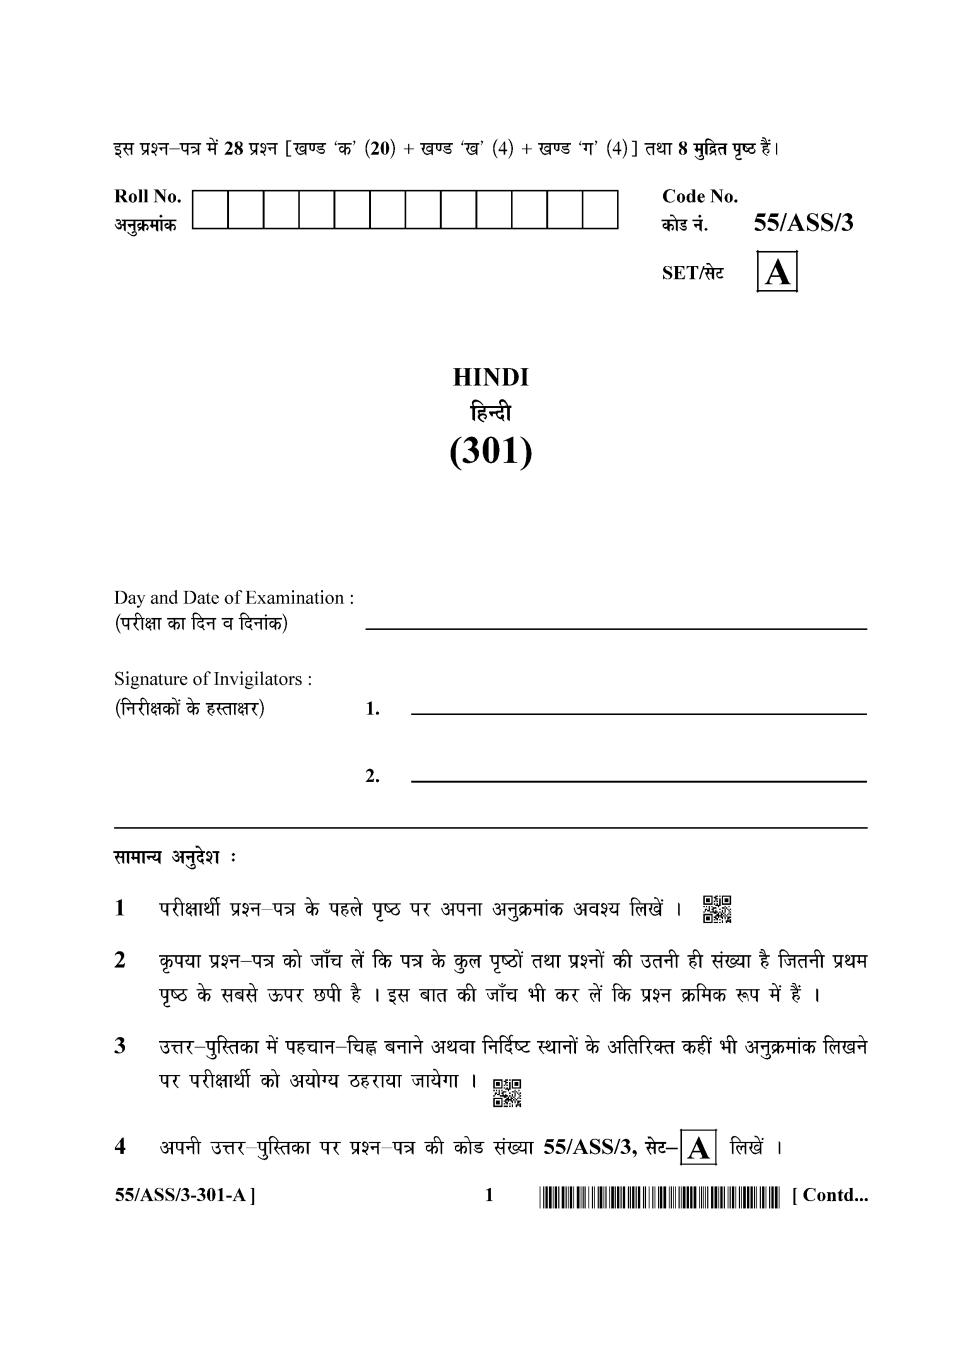 NIOS Class 12 Question Paper Oct 2017 - Hindi - Page 1